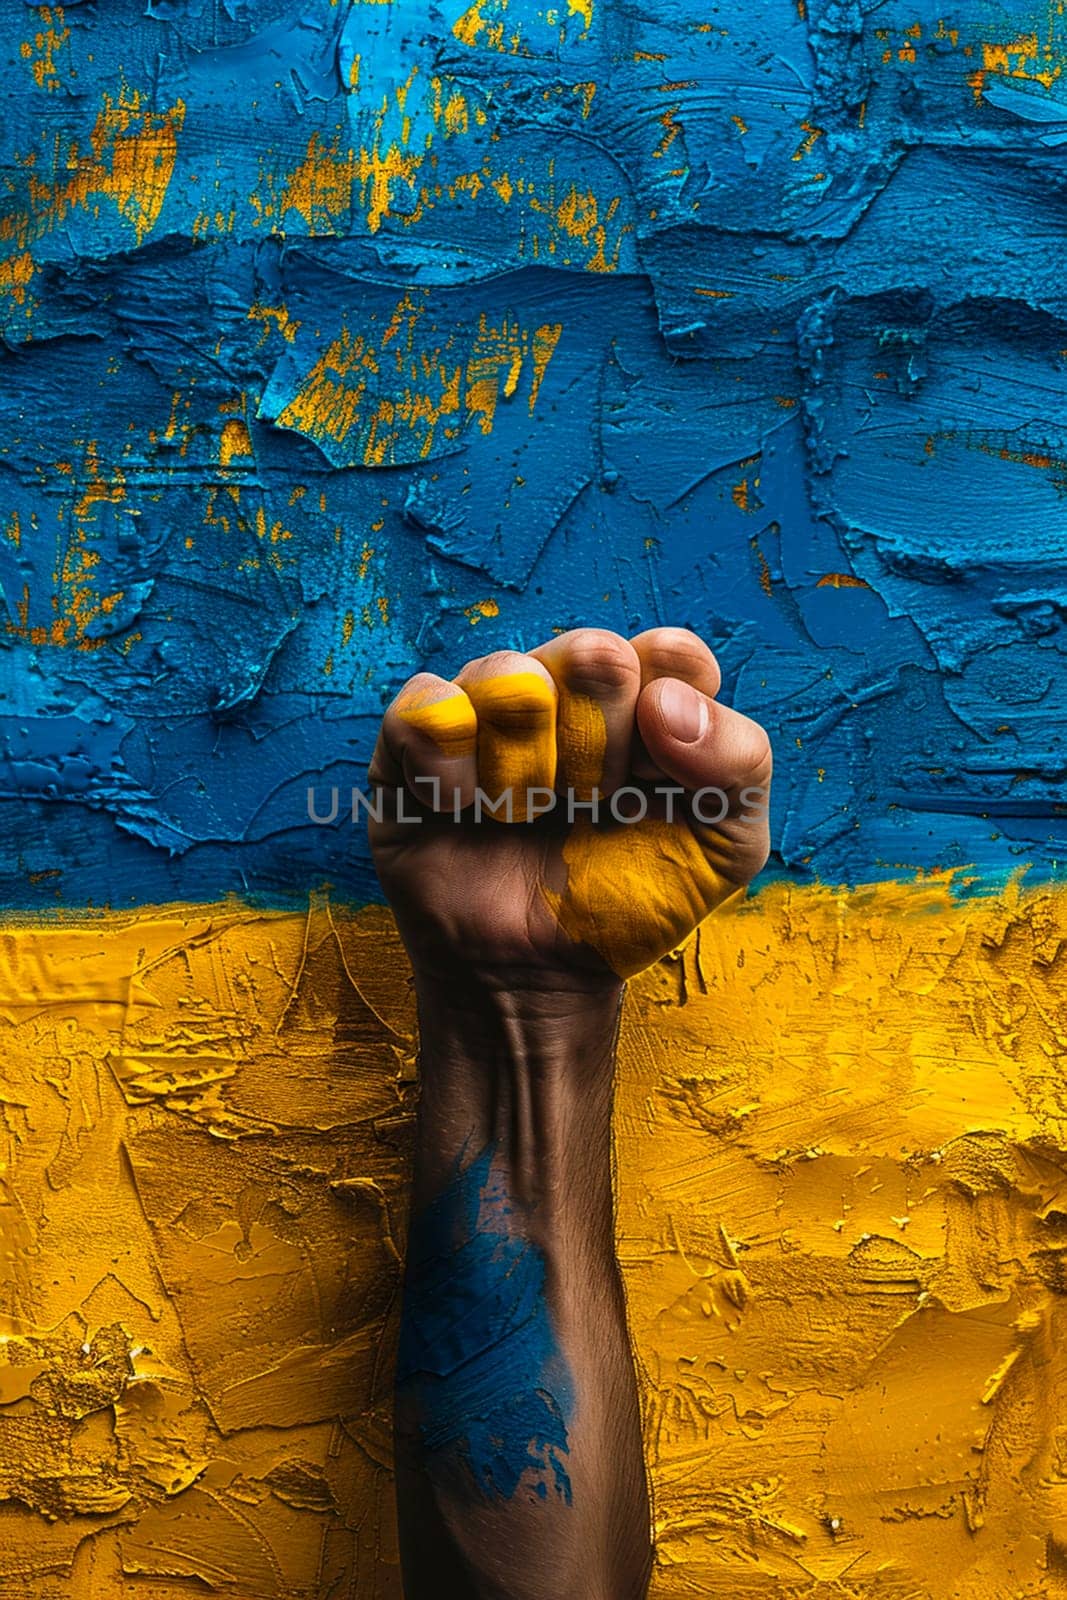 fist on the background of the Ukrainian flag. Selective focus. people.